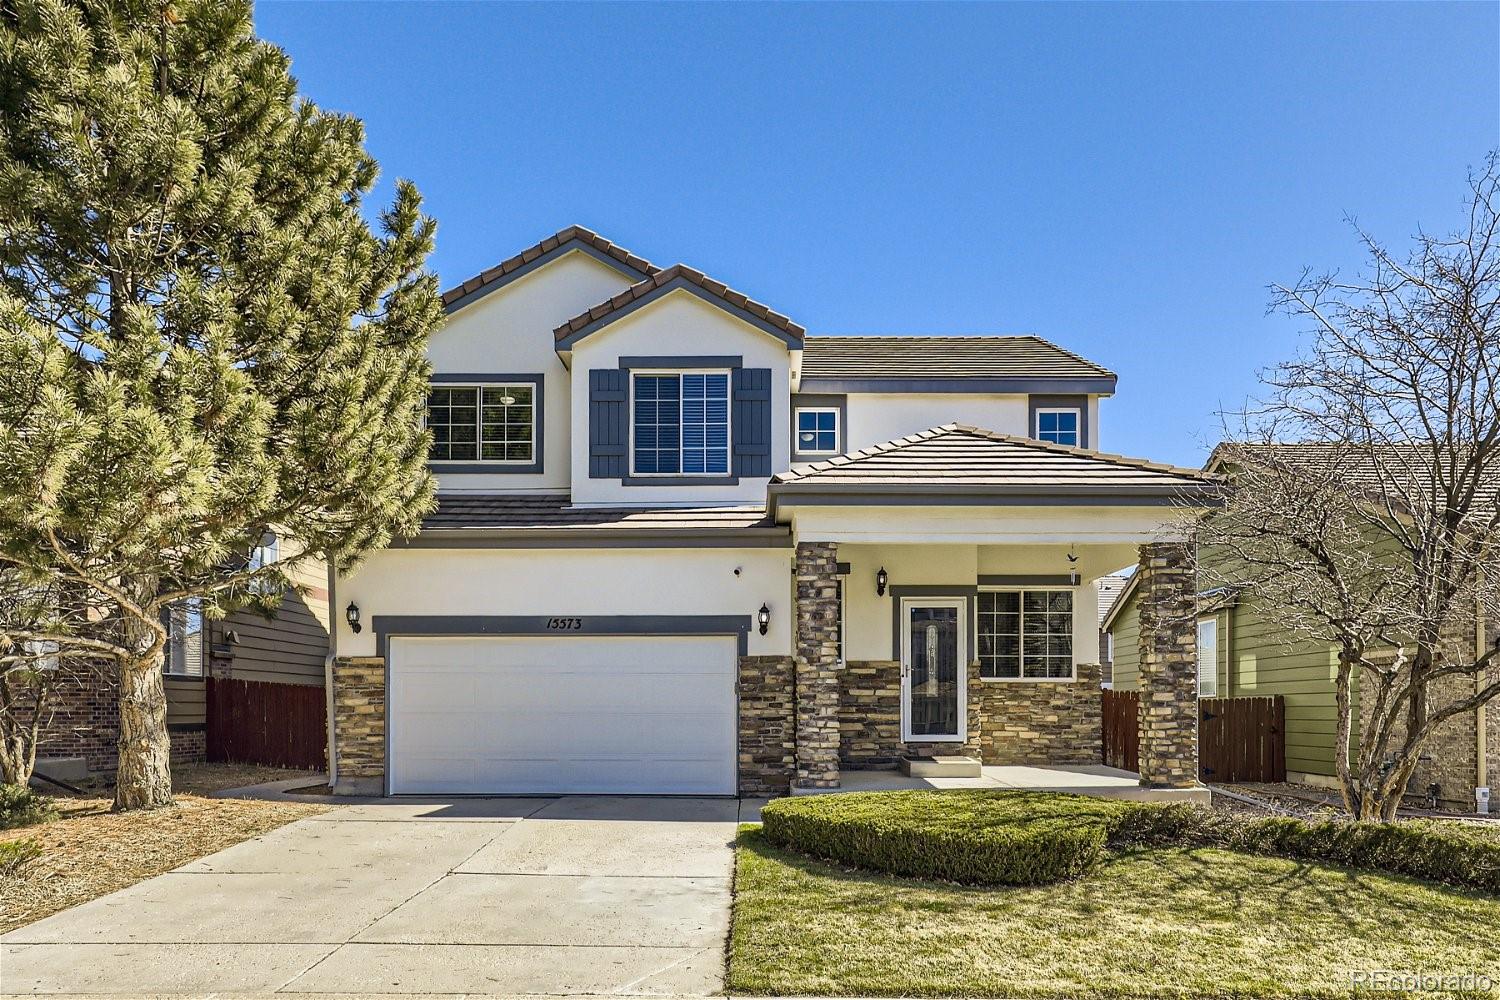 15573 E 96th Way, commerce city MLS: 8162955 Beds: 3 Baths: 3 Price: $515,000